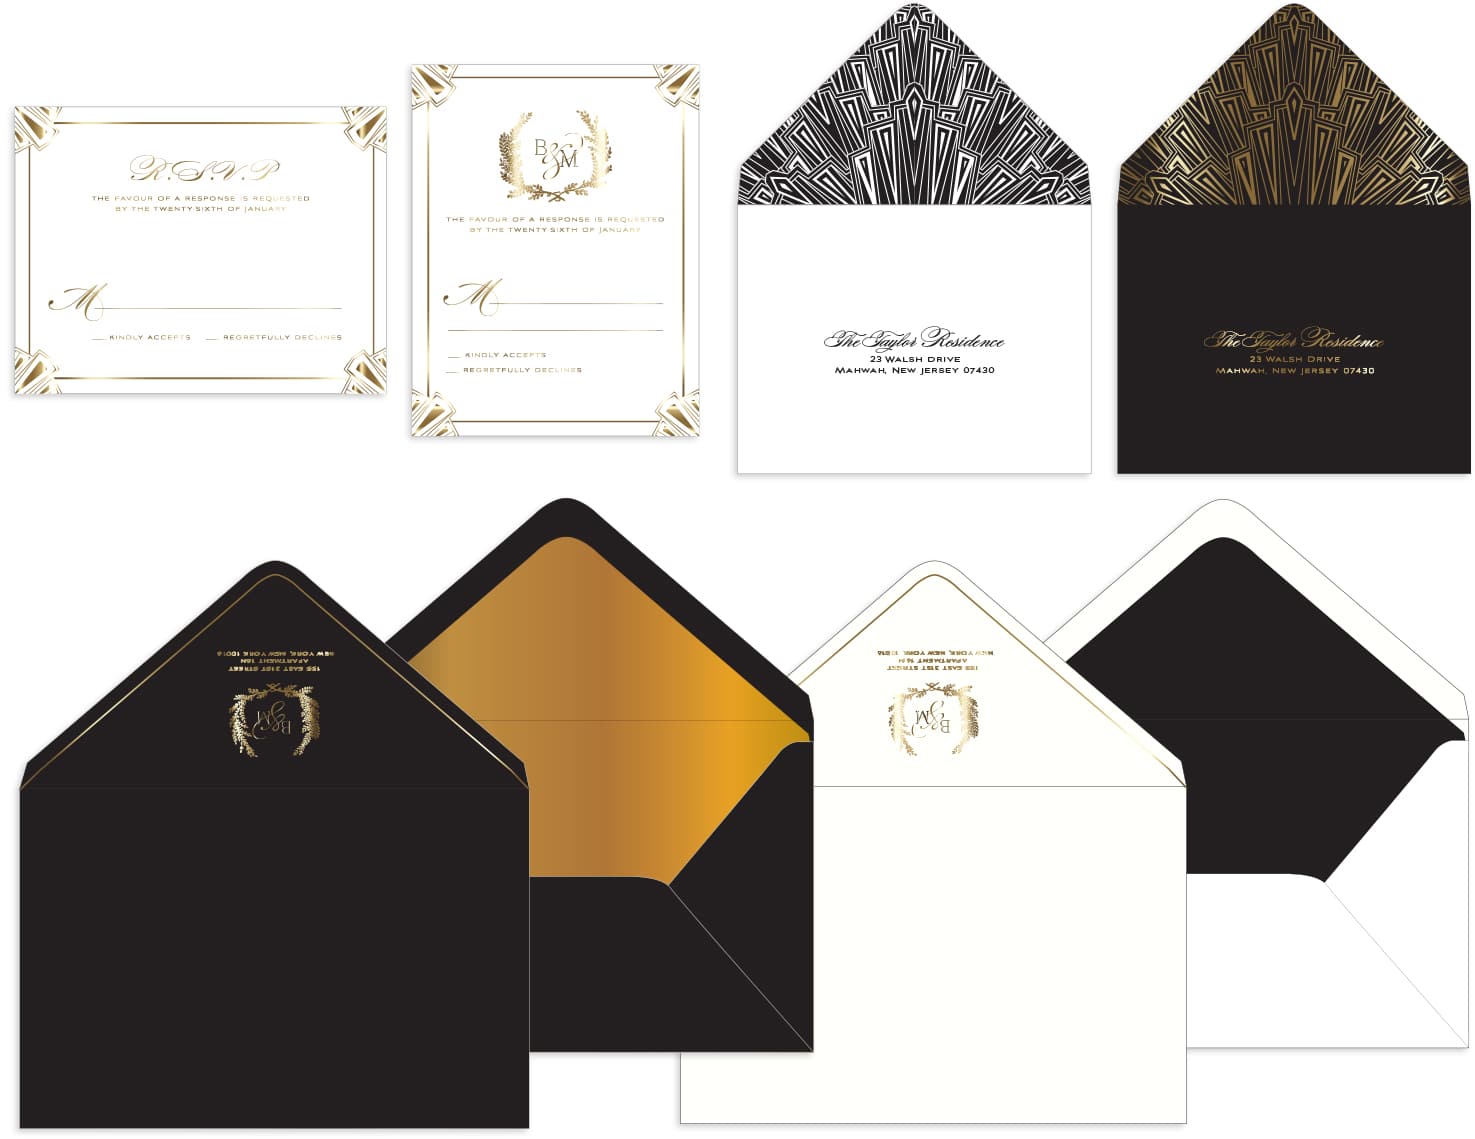 Deco envelopes and reply card sketches